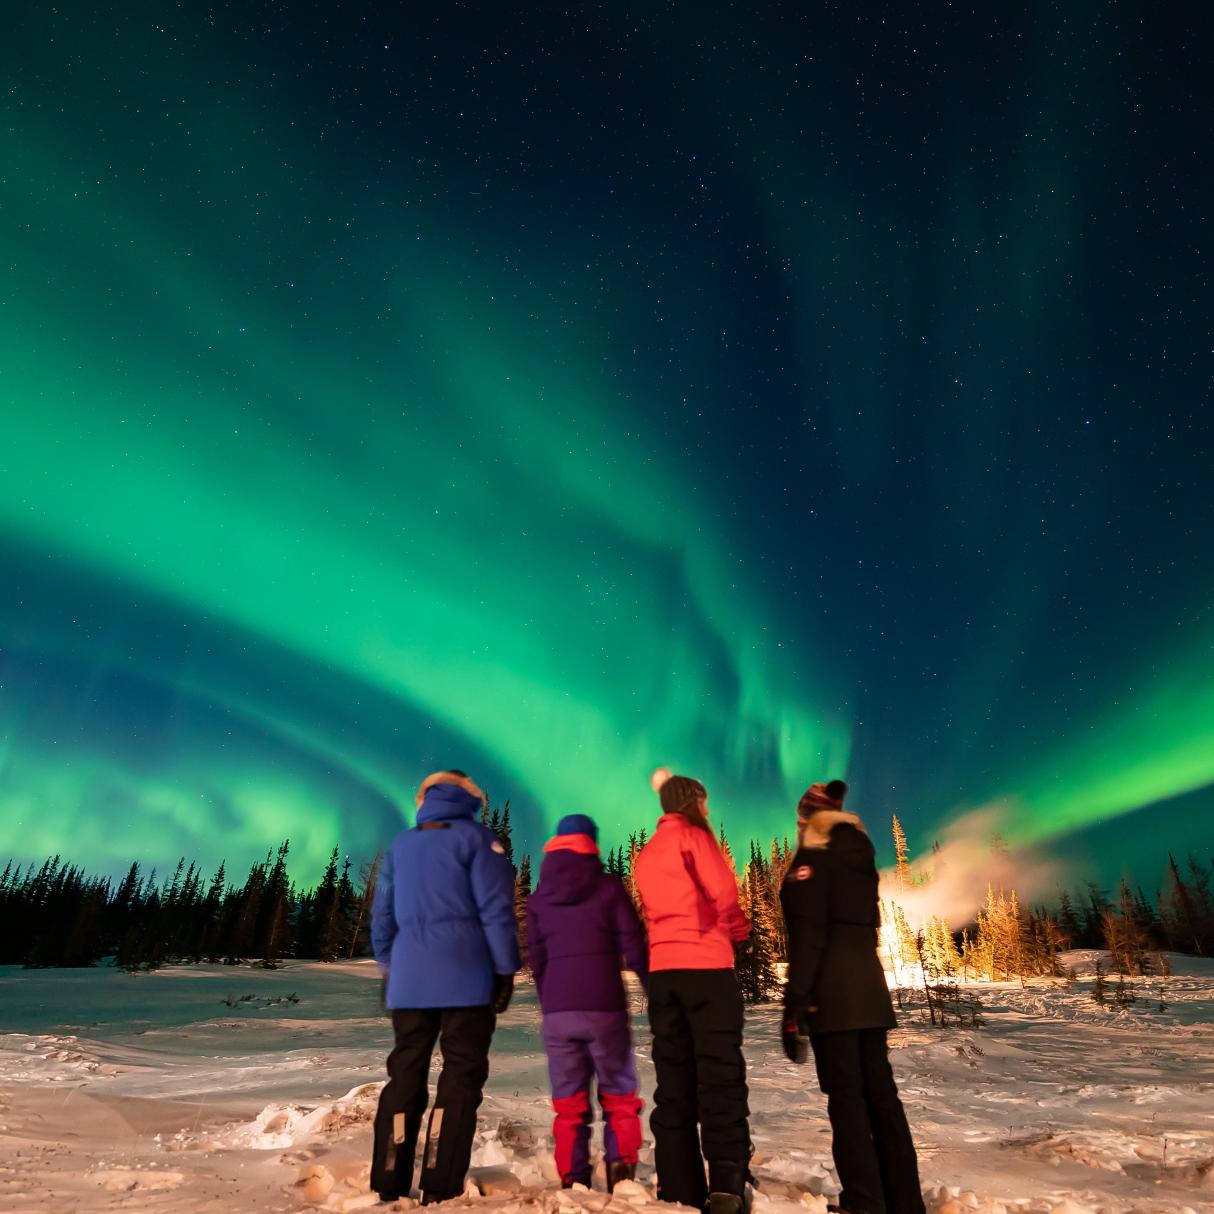 A group of people standing beneath the Northern Lights